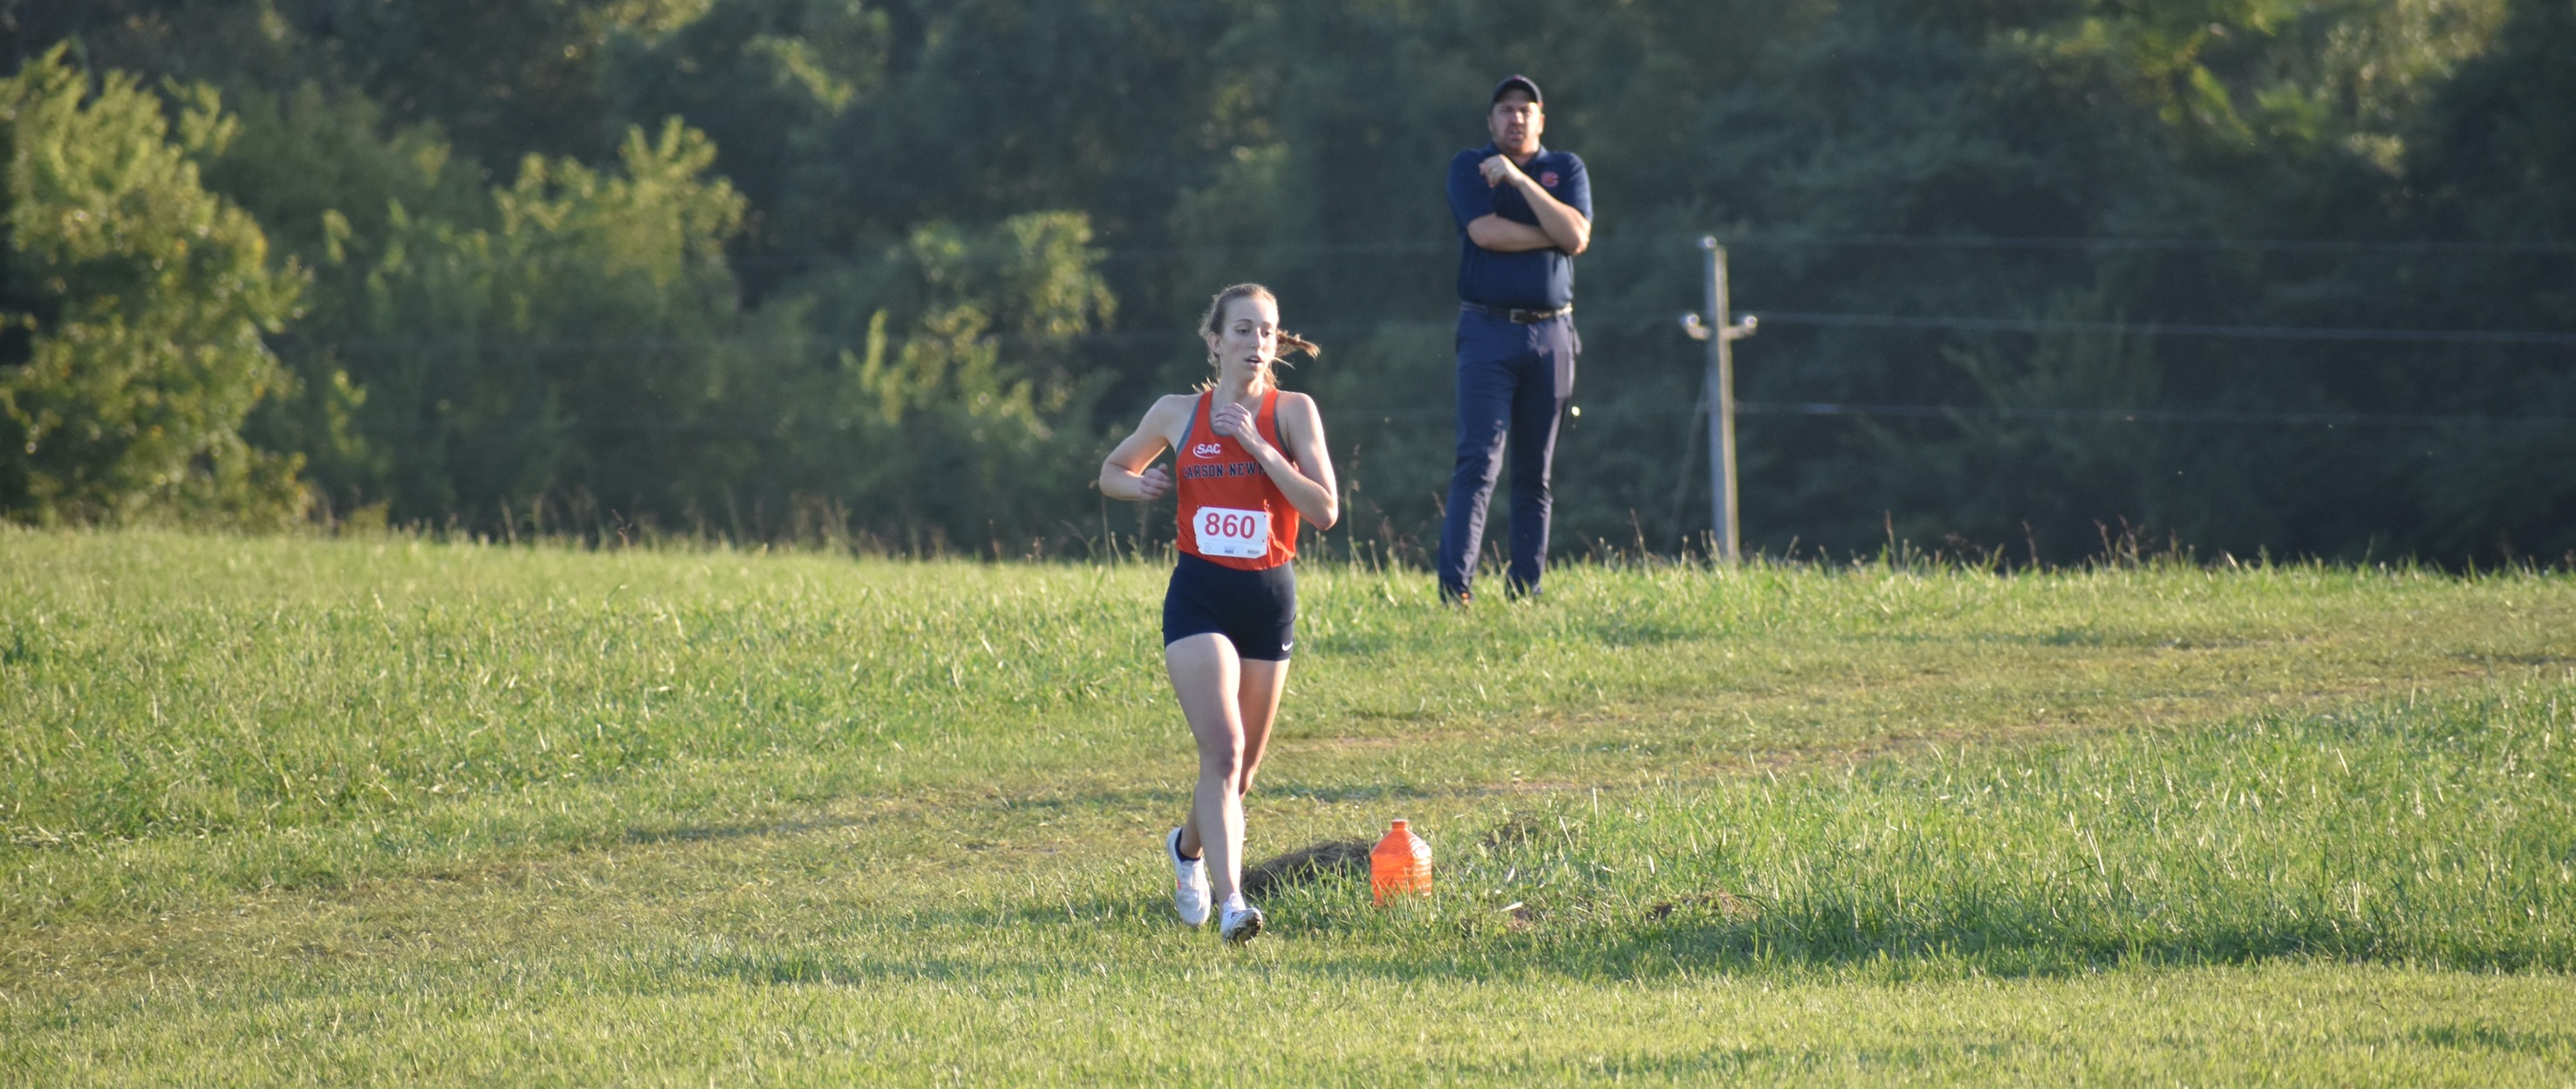 Brugmans, Strayer earn top-three finishes as Eagles open season in Greeneville